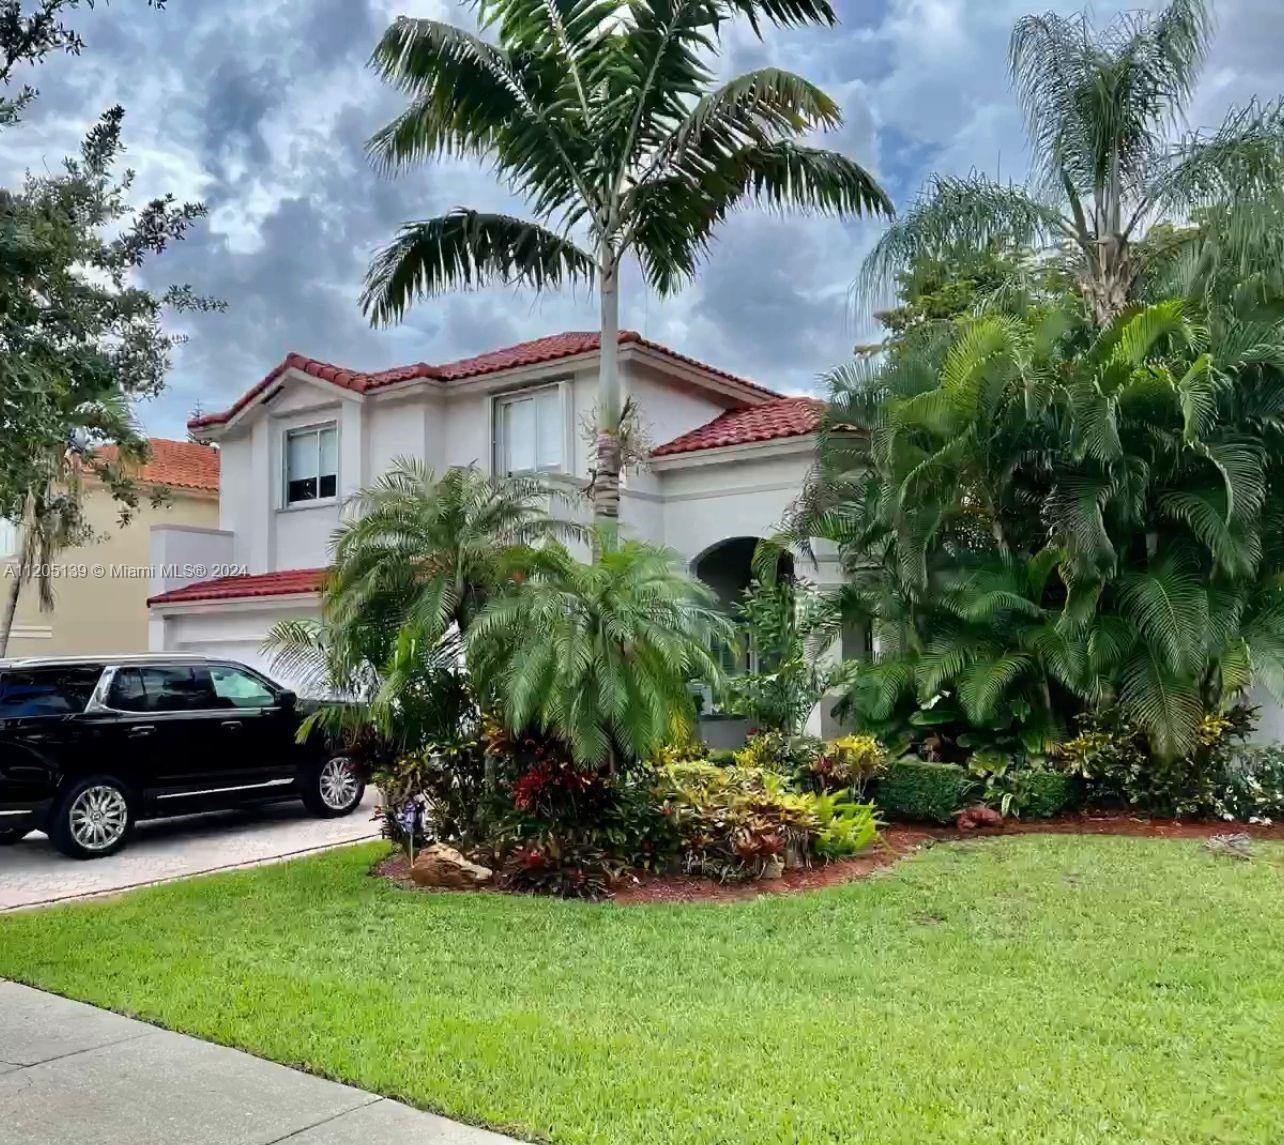 Photo 1 of 11310 NW 61st St in Doral - MLS A11205139